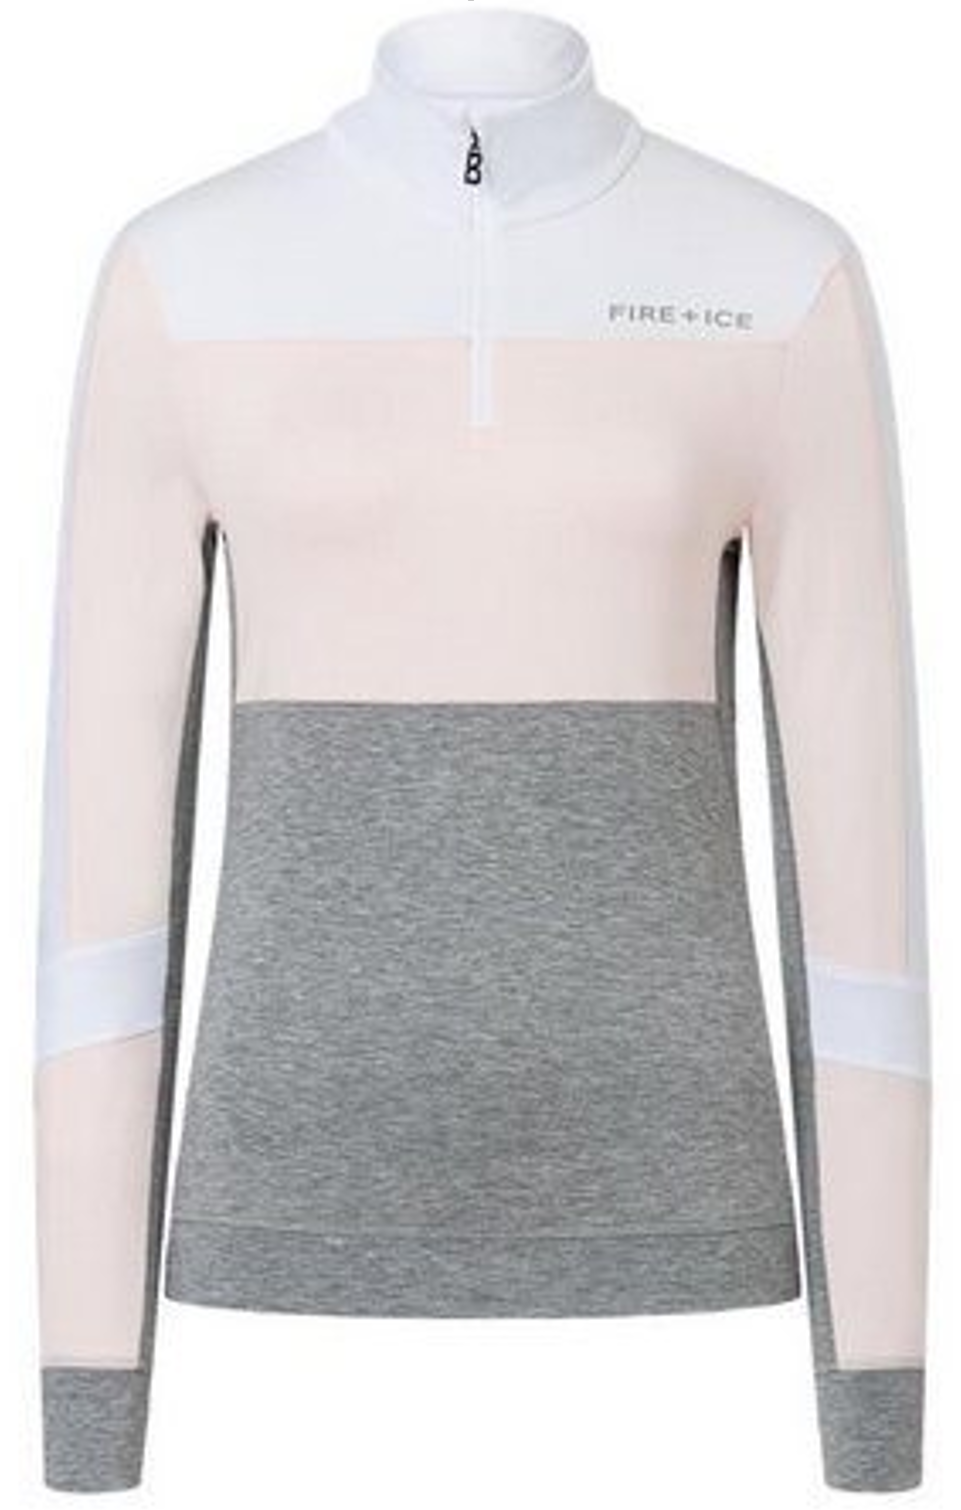 Bogner Fire + Ice First Layer Esra rosa